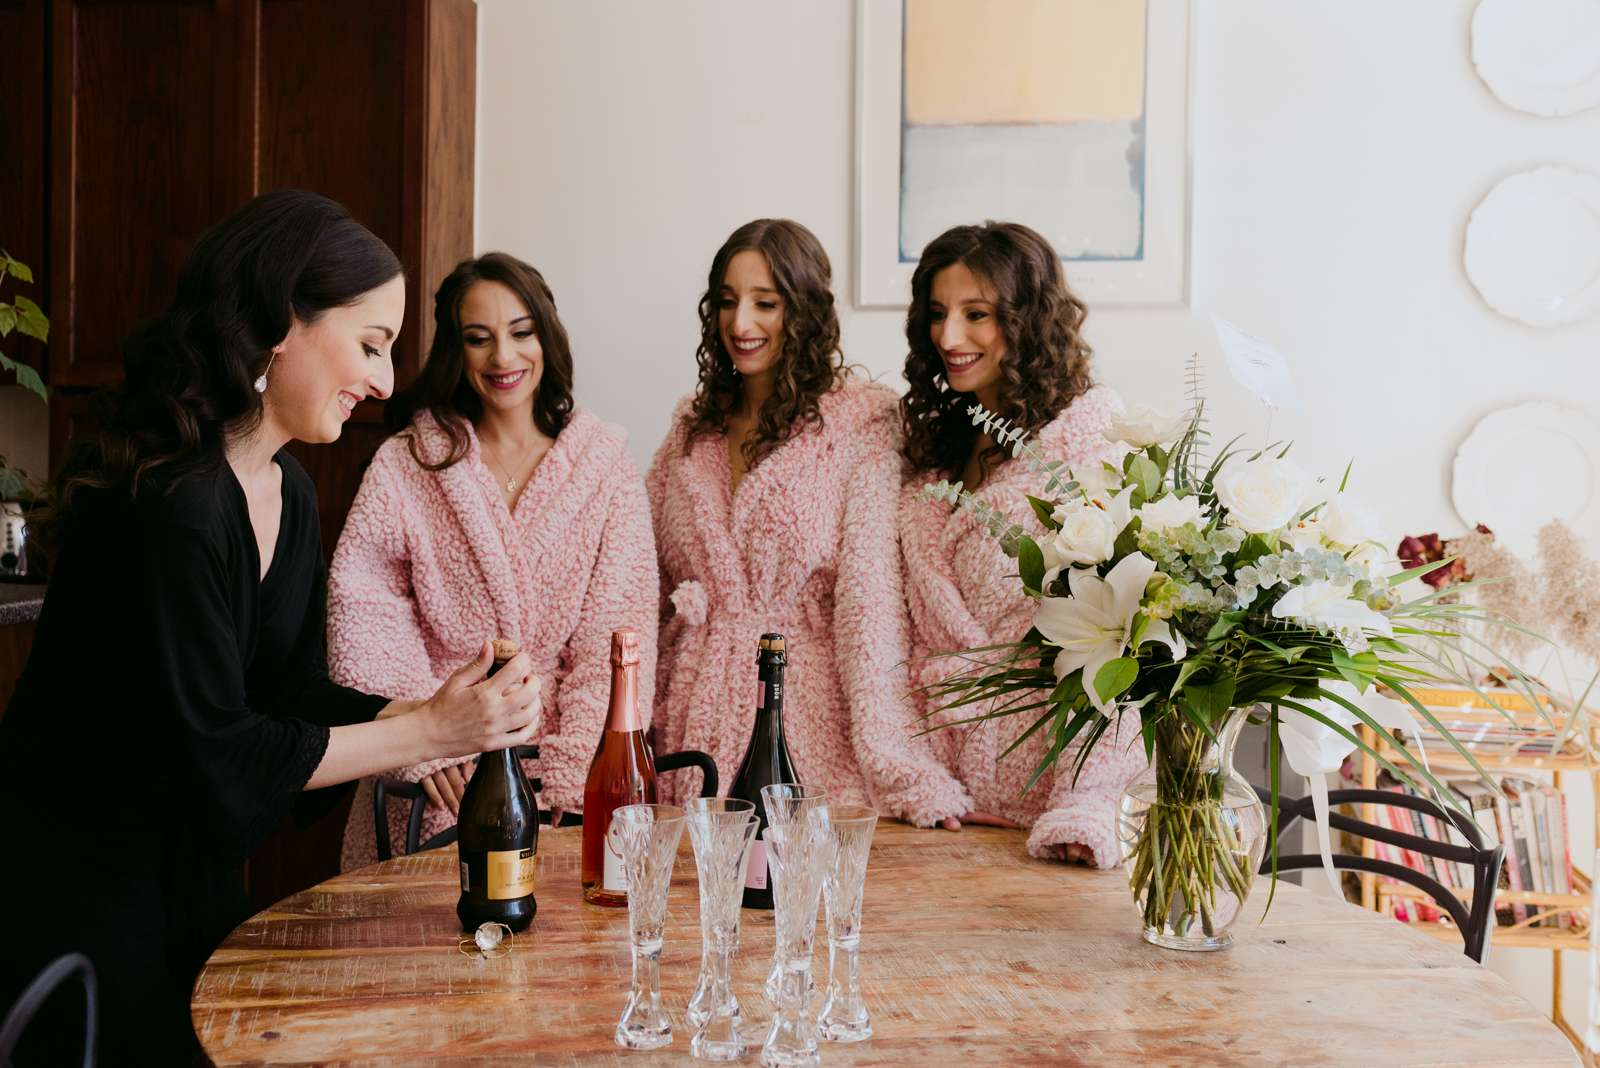 bride opening a bottle of champagne with her bridesmaids watching